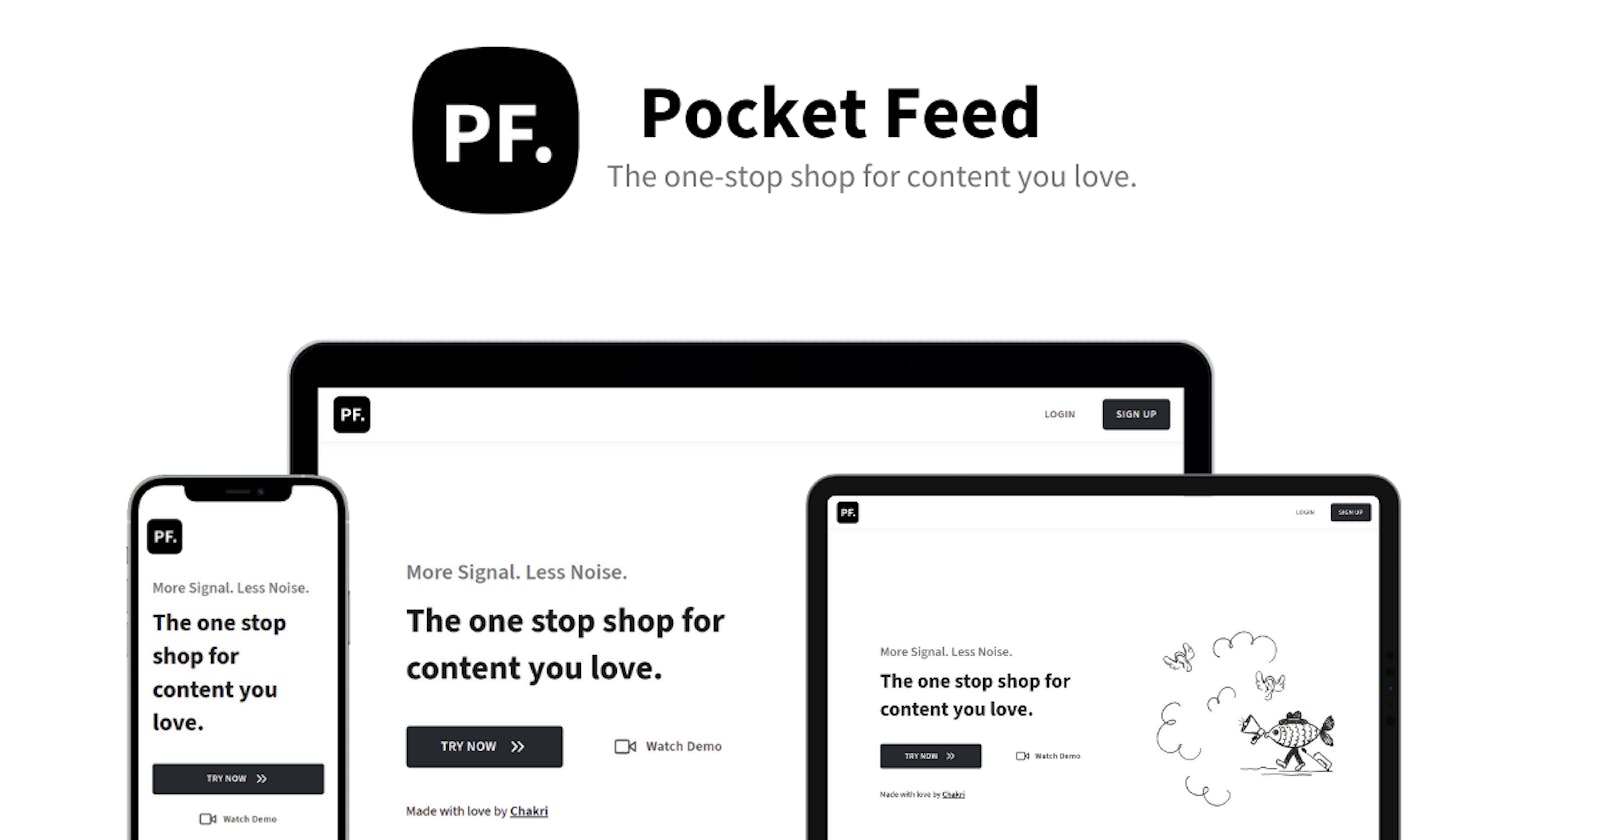 Introducing Pocket Feed - The one-stop shop for content you love